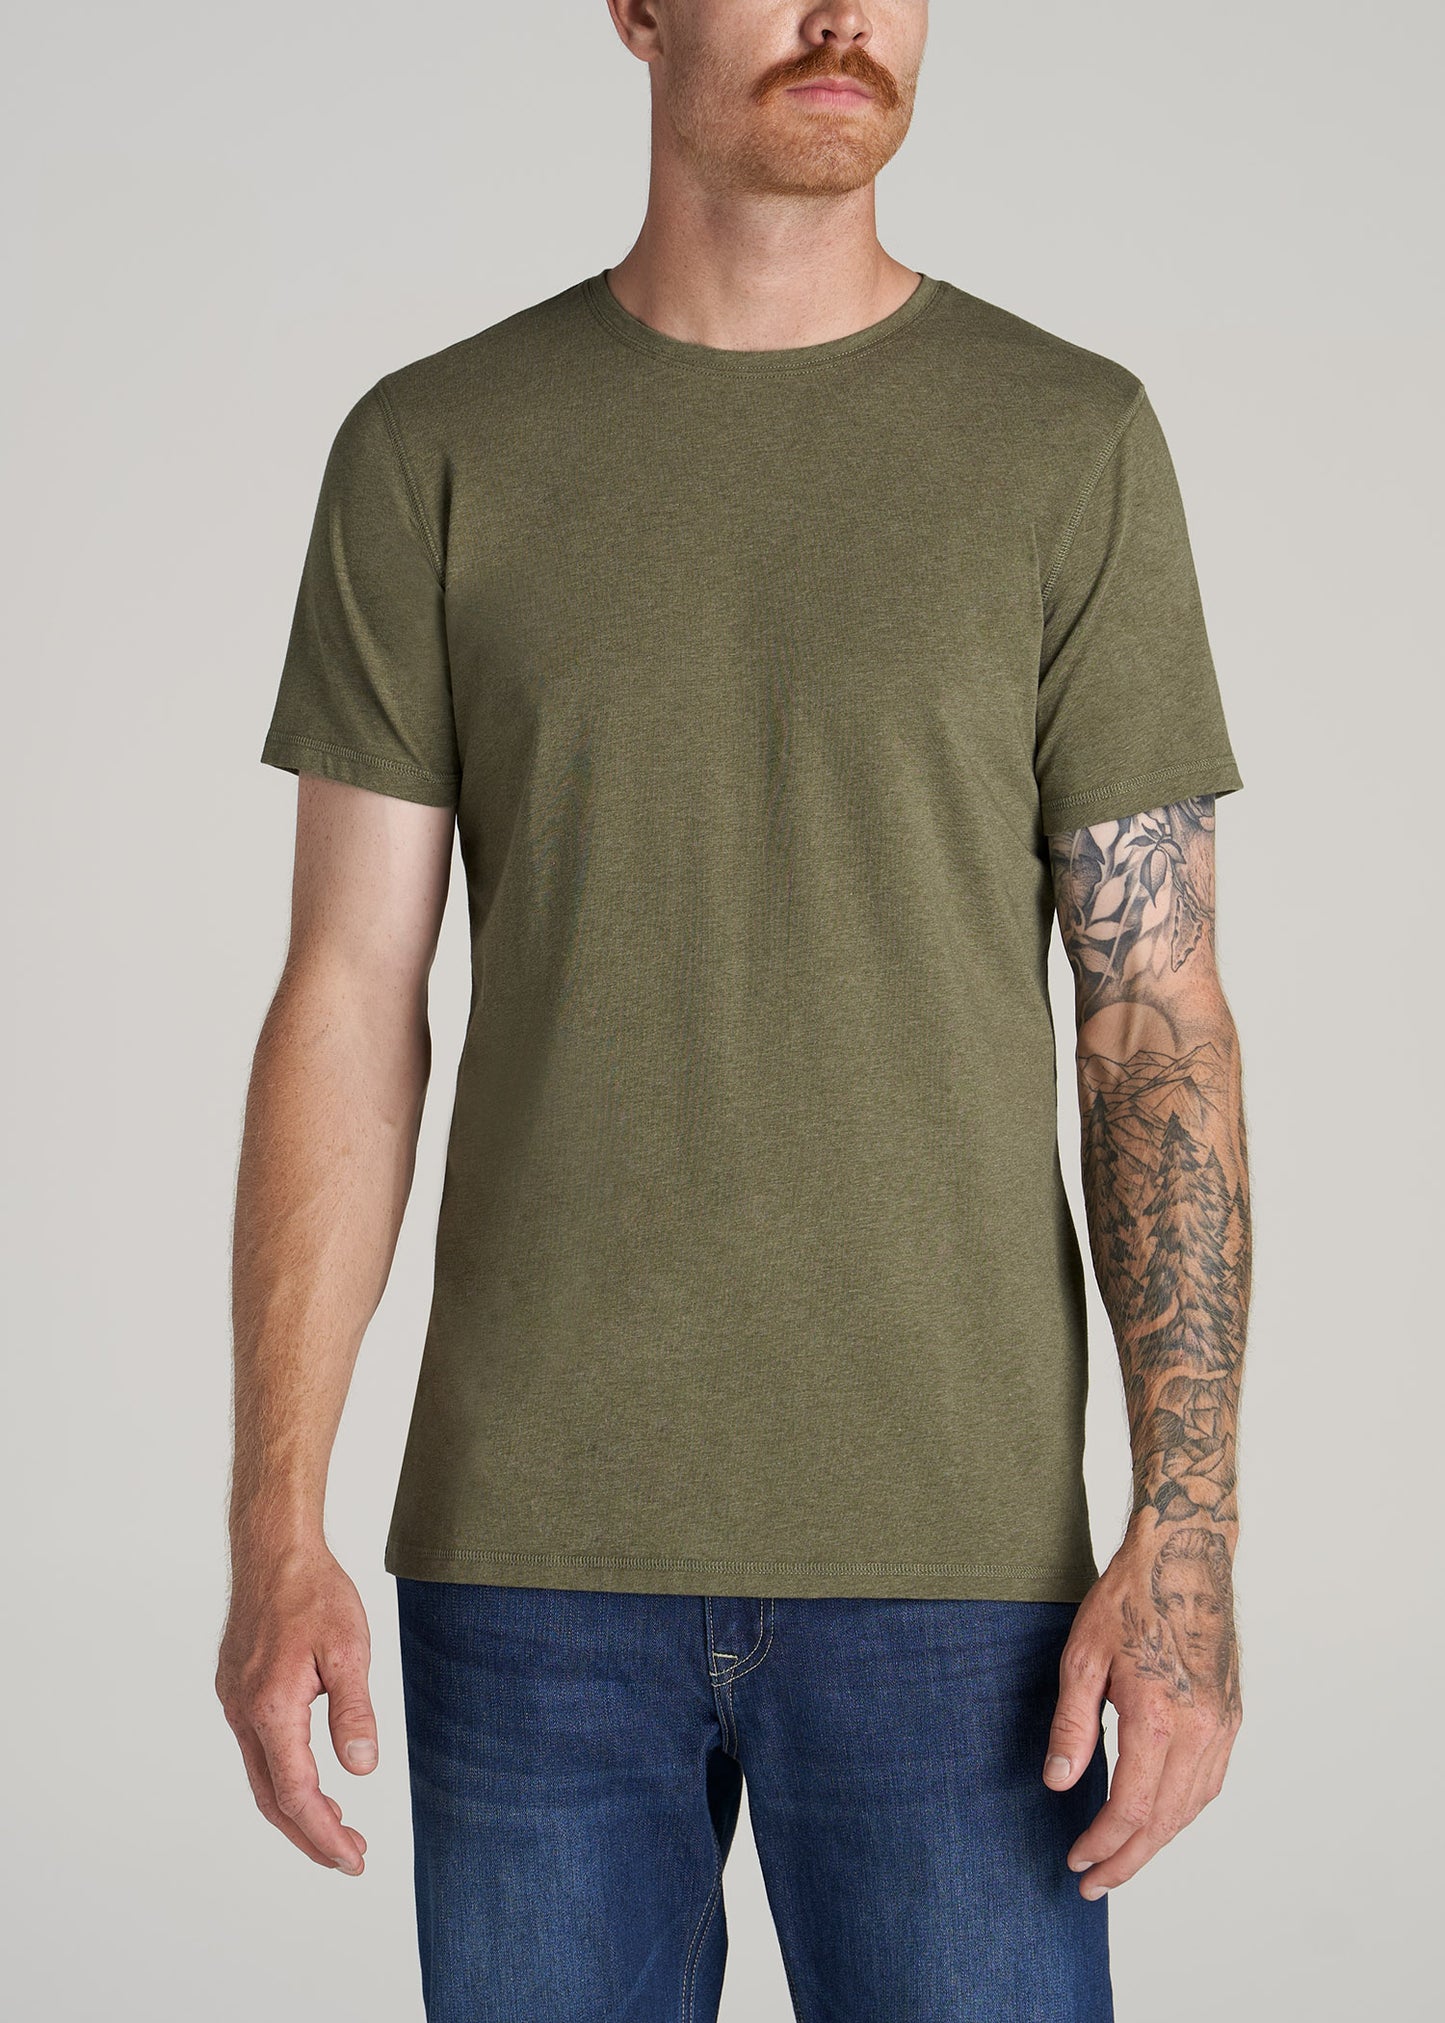 A tall man wearing a slim-fit crewneck t-shirt in olive green.